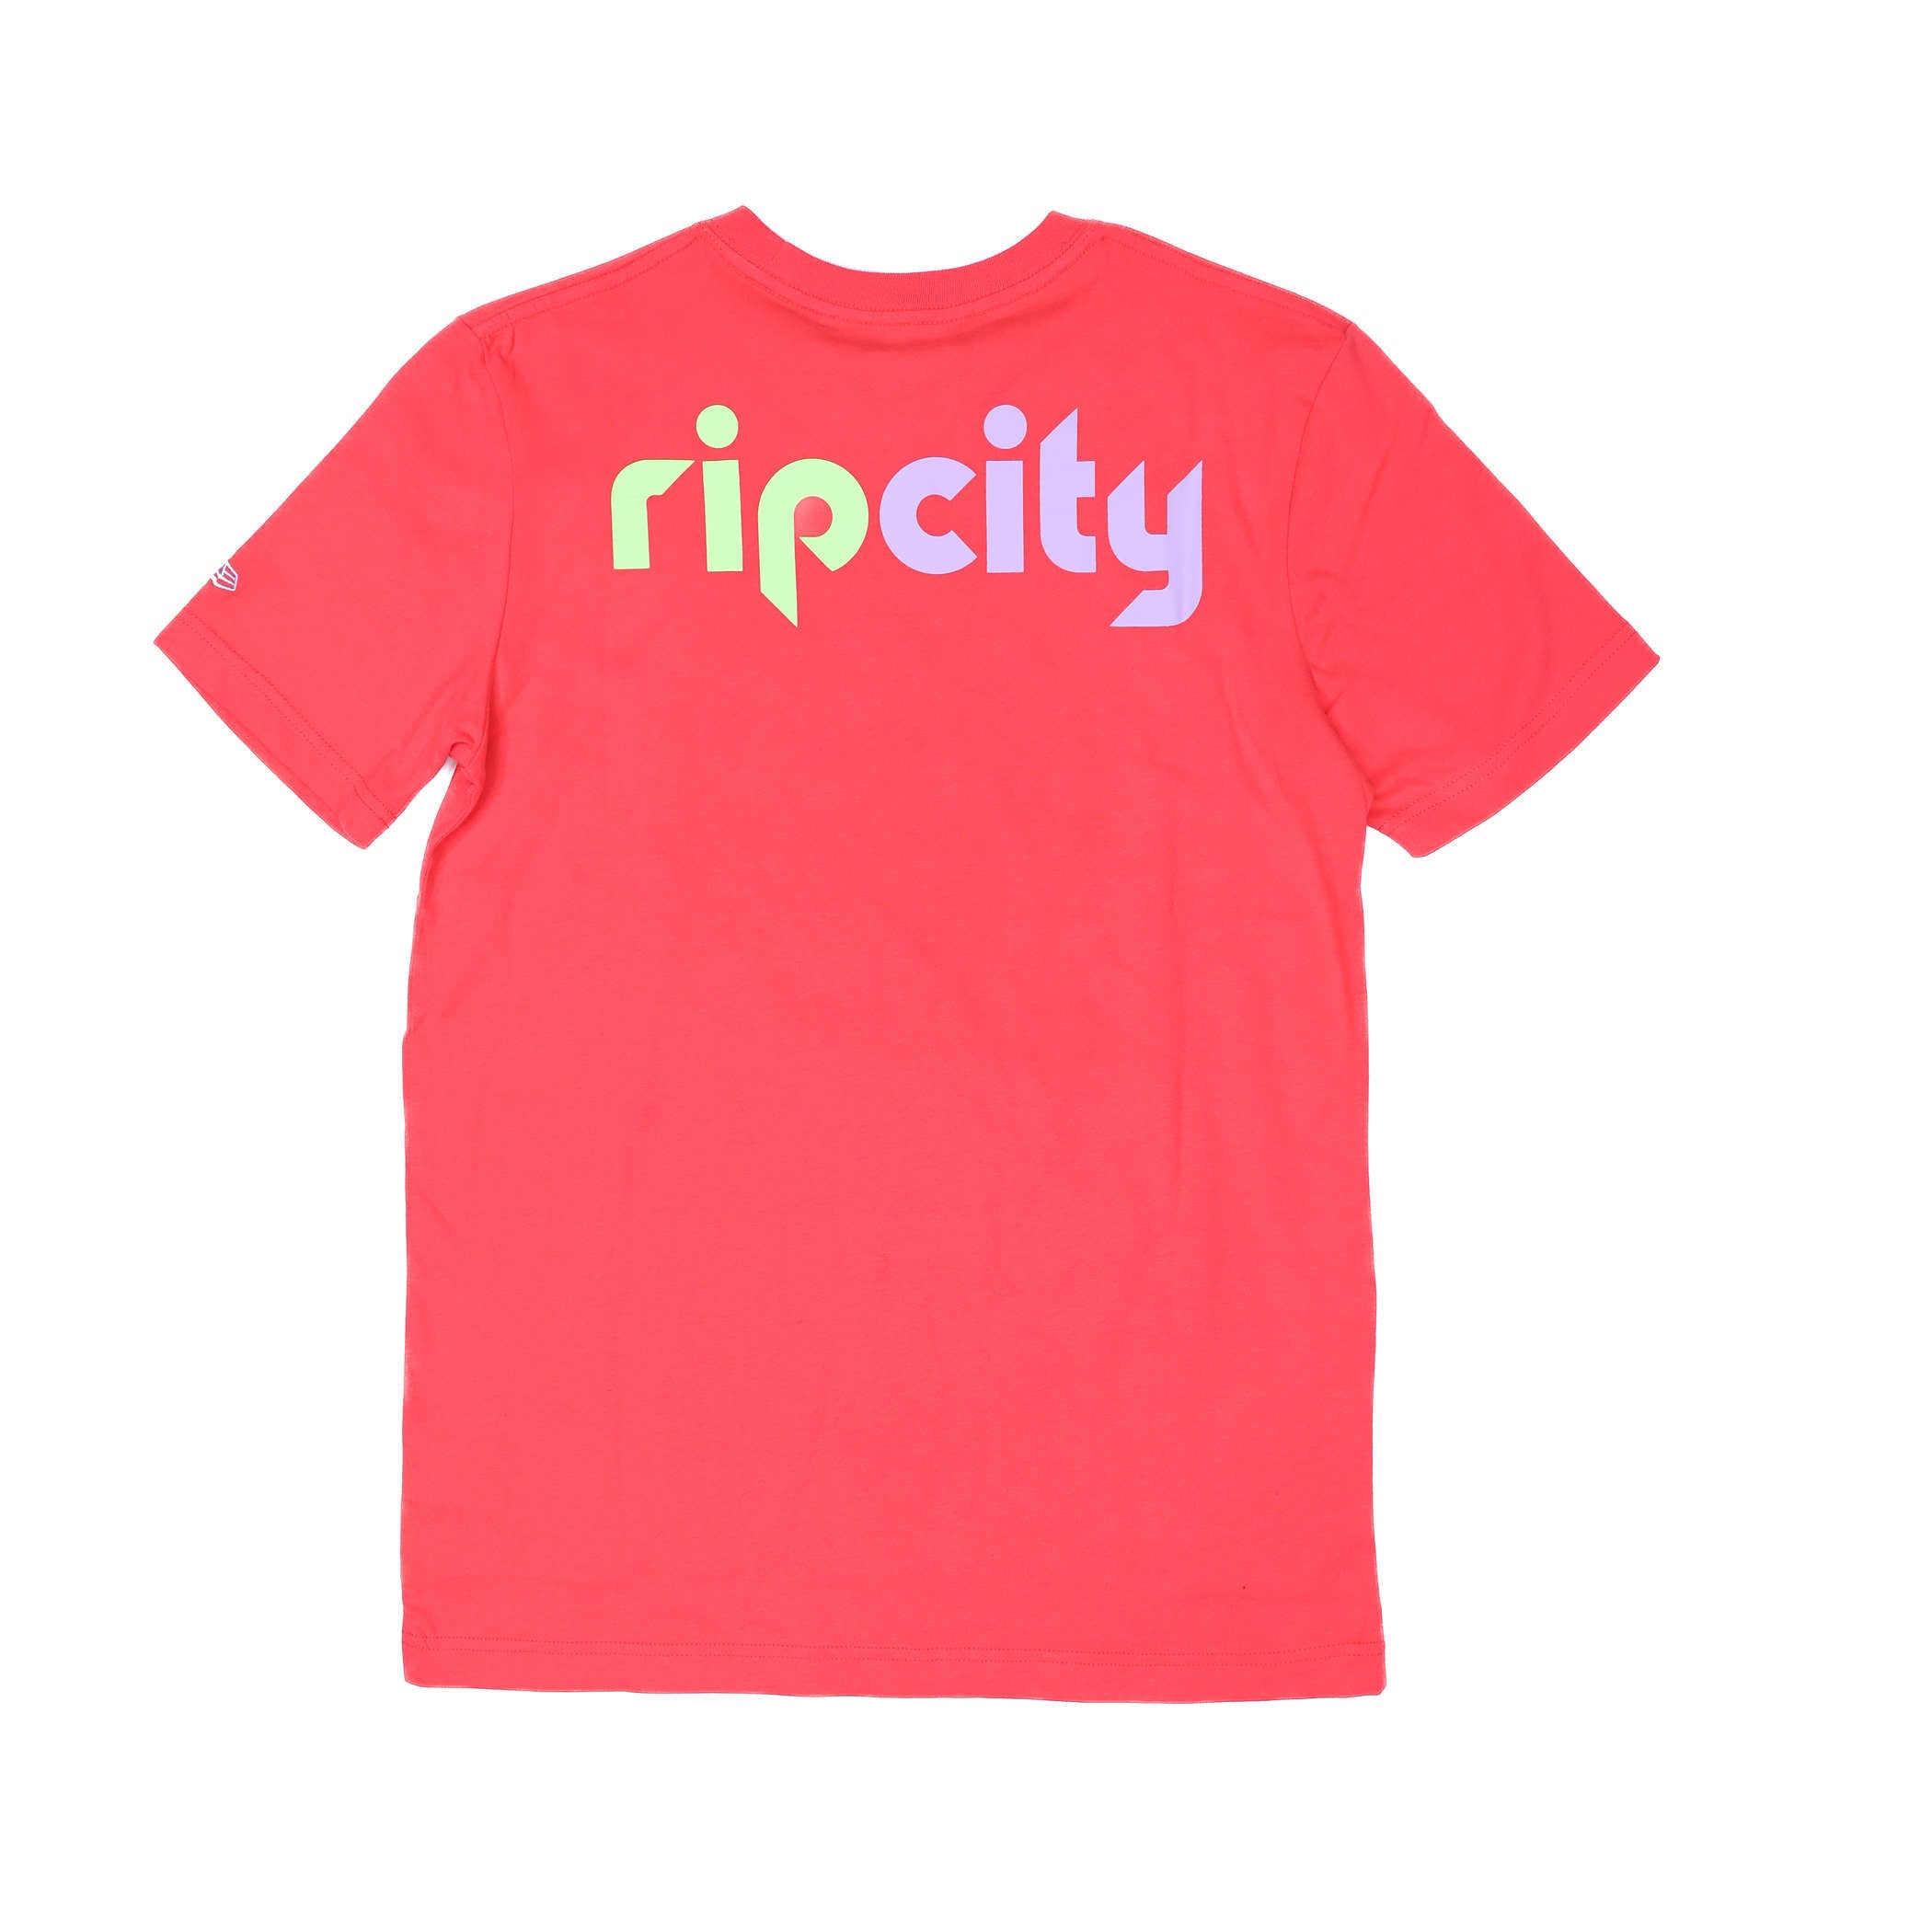 Rip City Clothing (@ripcityclothing) • Instagram photos and videos